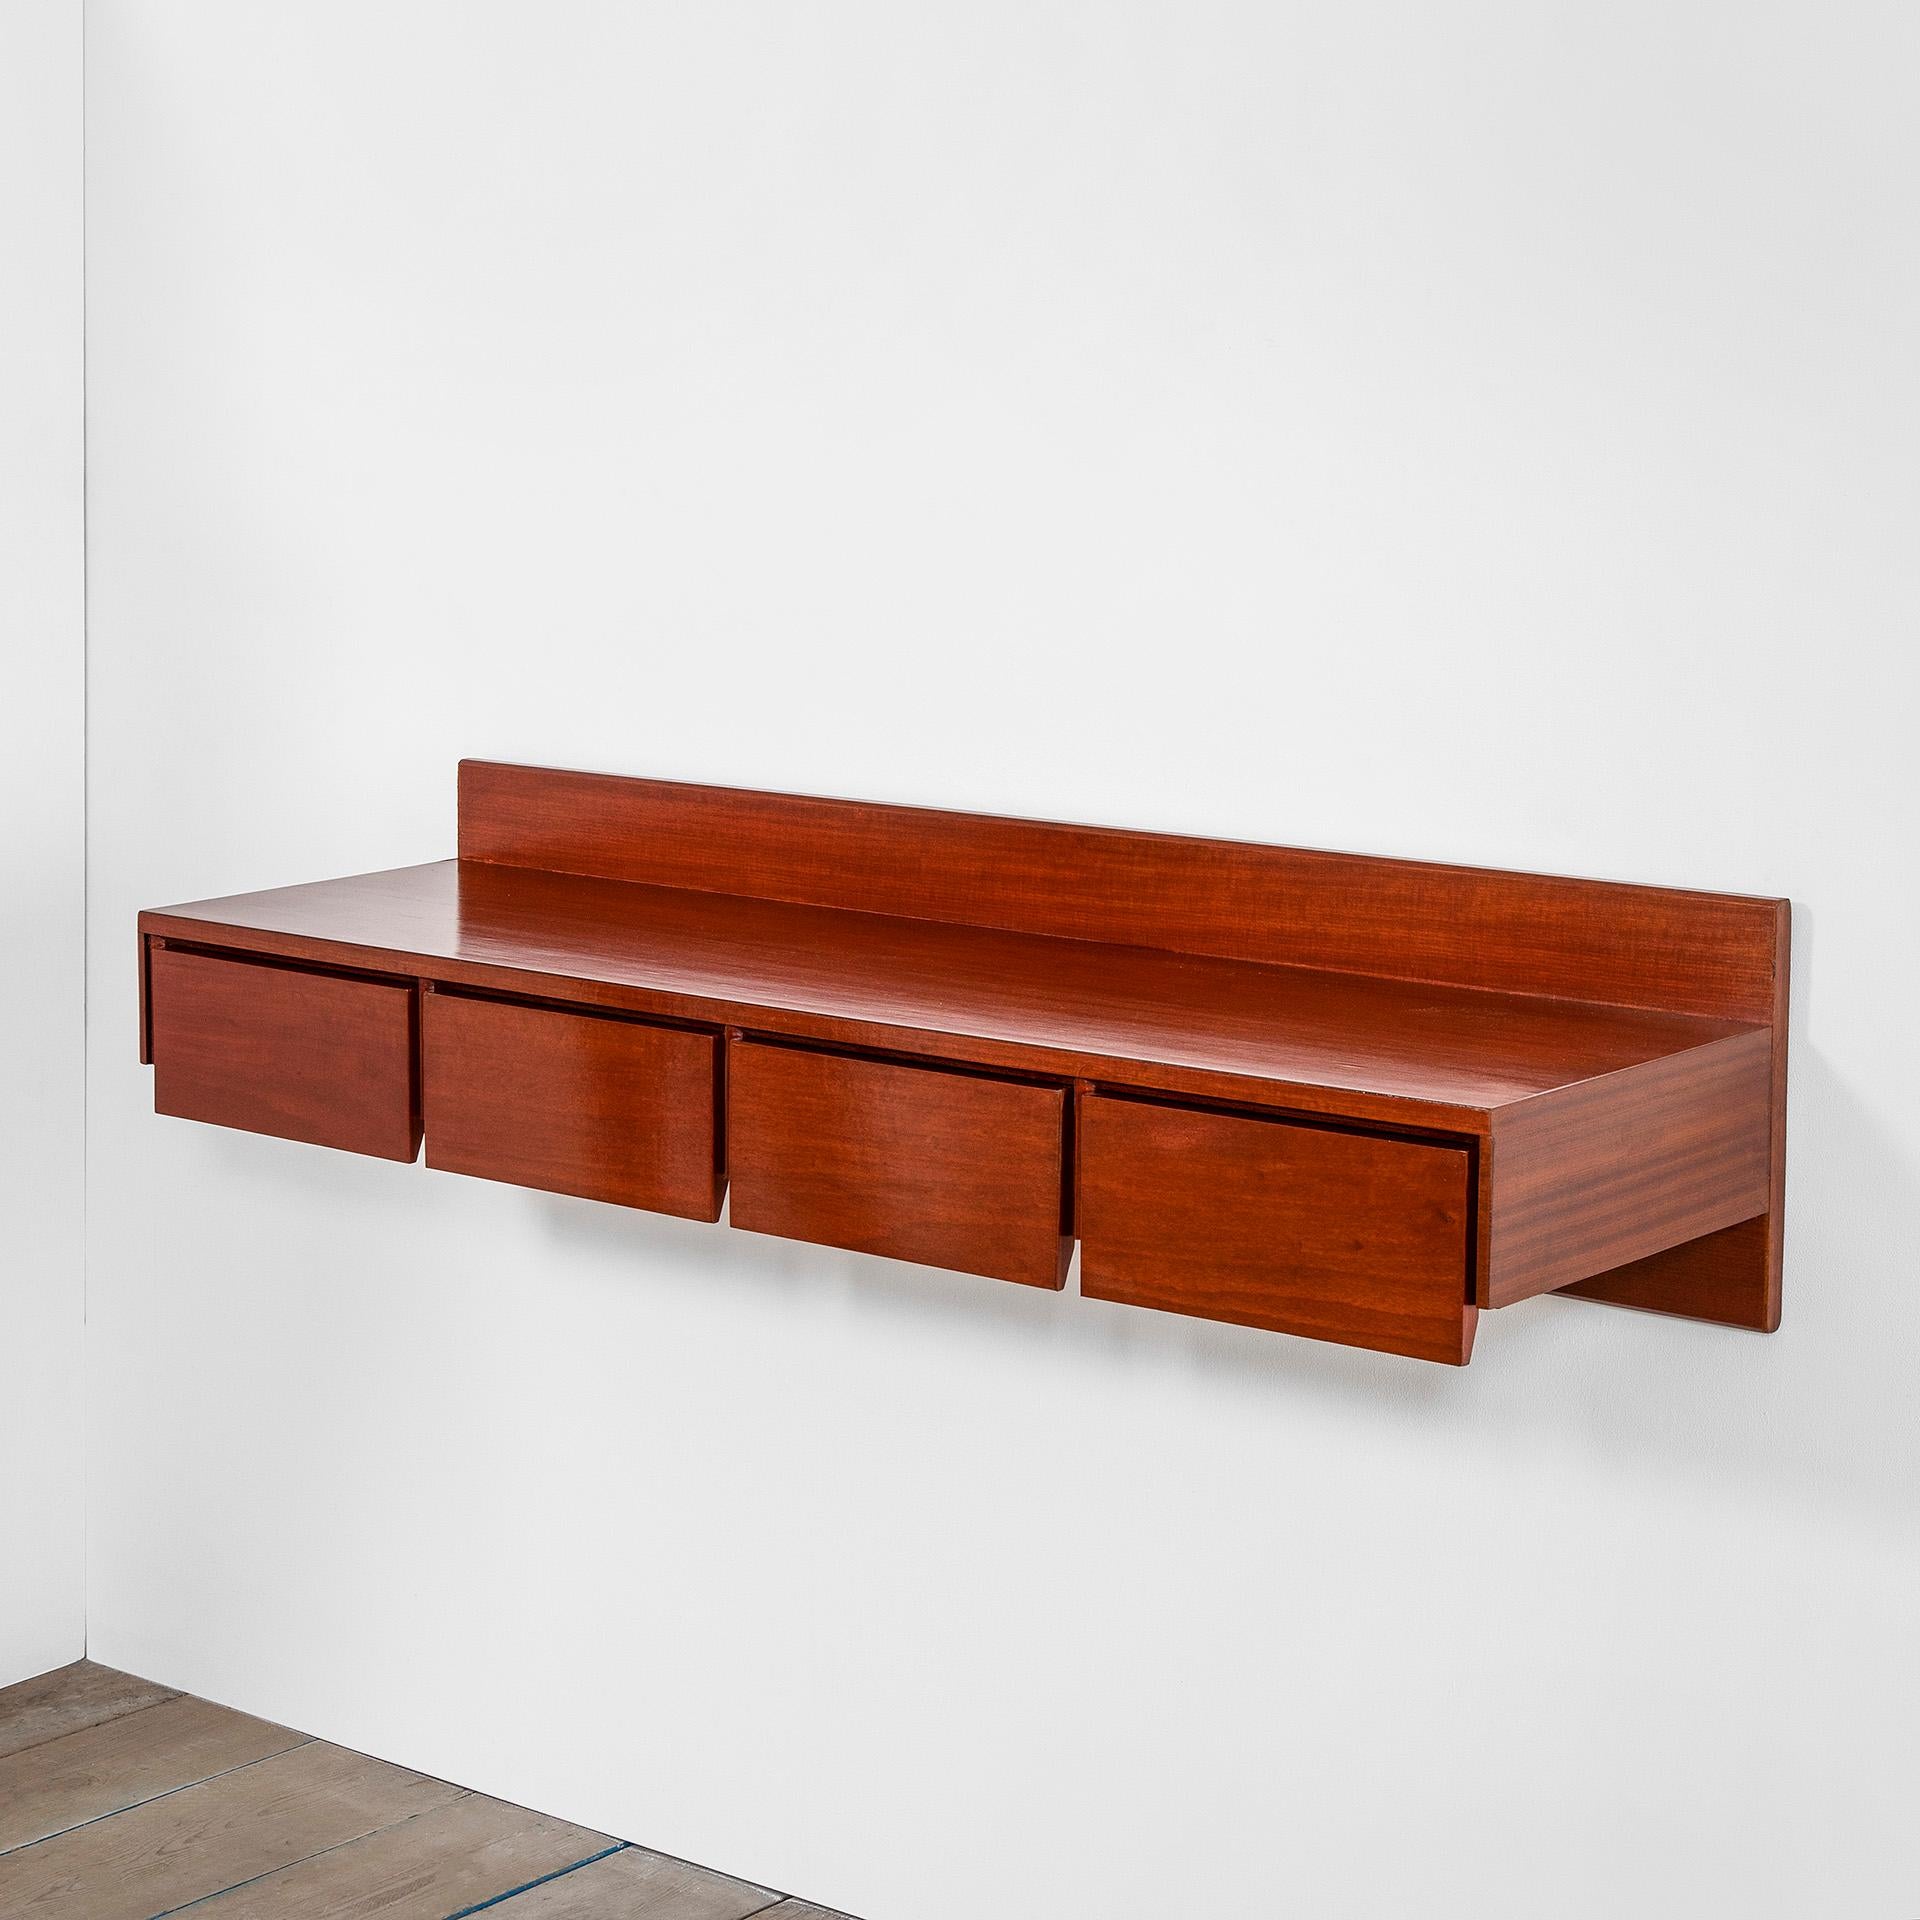 Hanging console designed in 1960s by Ico Parisi for Brugnoli Mobili Cantù. The console is totally in wood and has 3 drawers. Therefore it can be multifunctional: you can put books, ornaments, photoframes upon the long and useful horizontal plane and